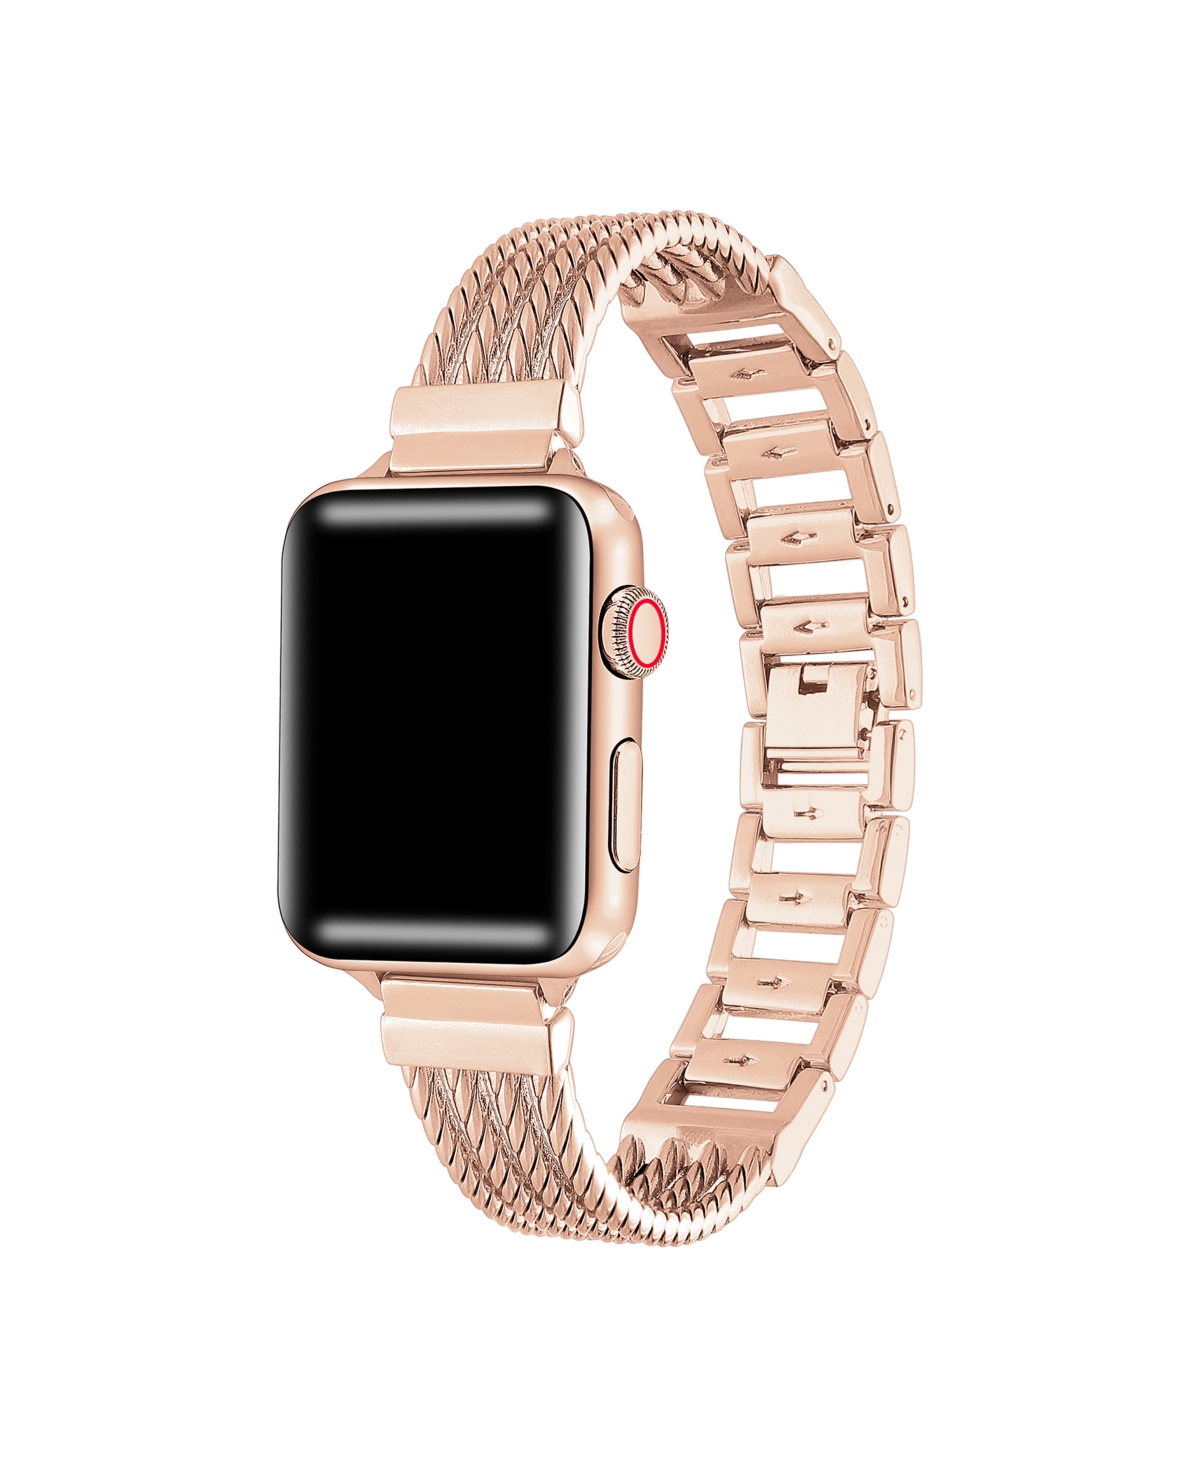 Shop Posh Tech Unisex Clara Stainless Steel Bracelet Band For Apple Watch Size-38mm,40mm,41mm In Rose Gold